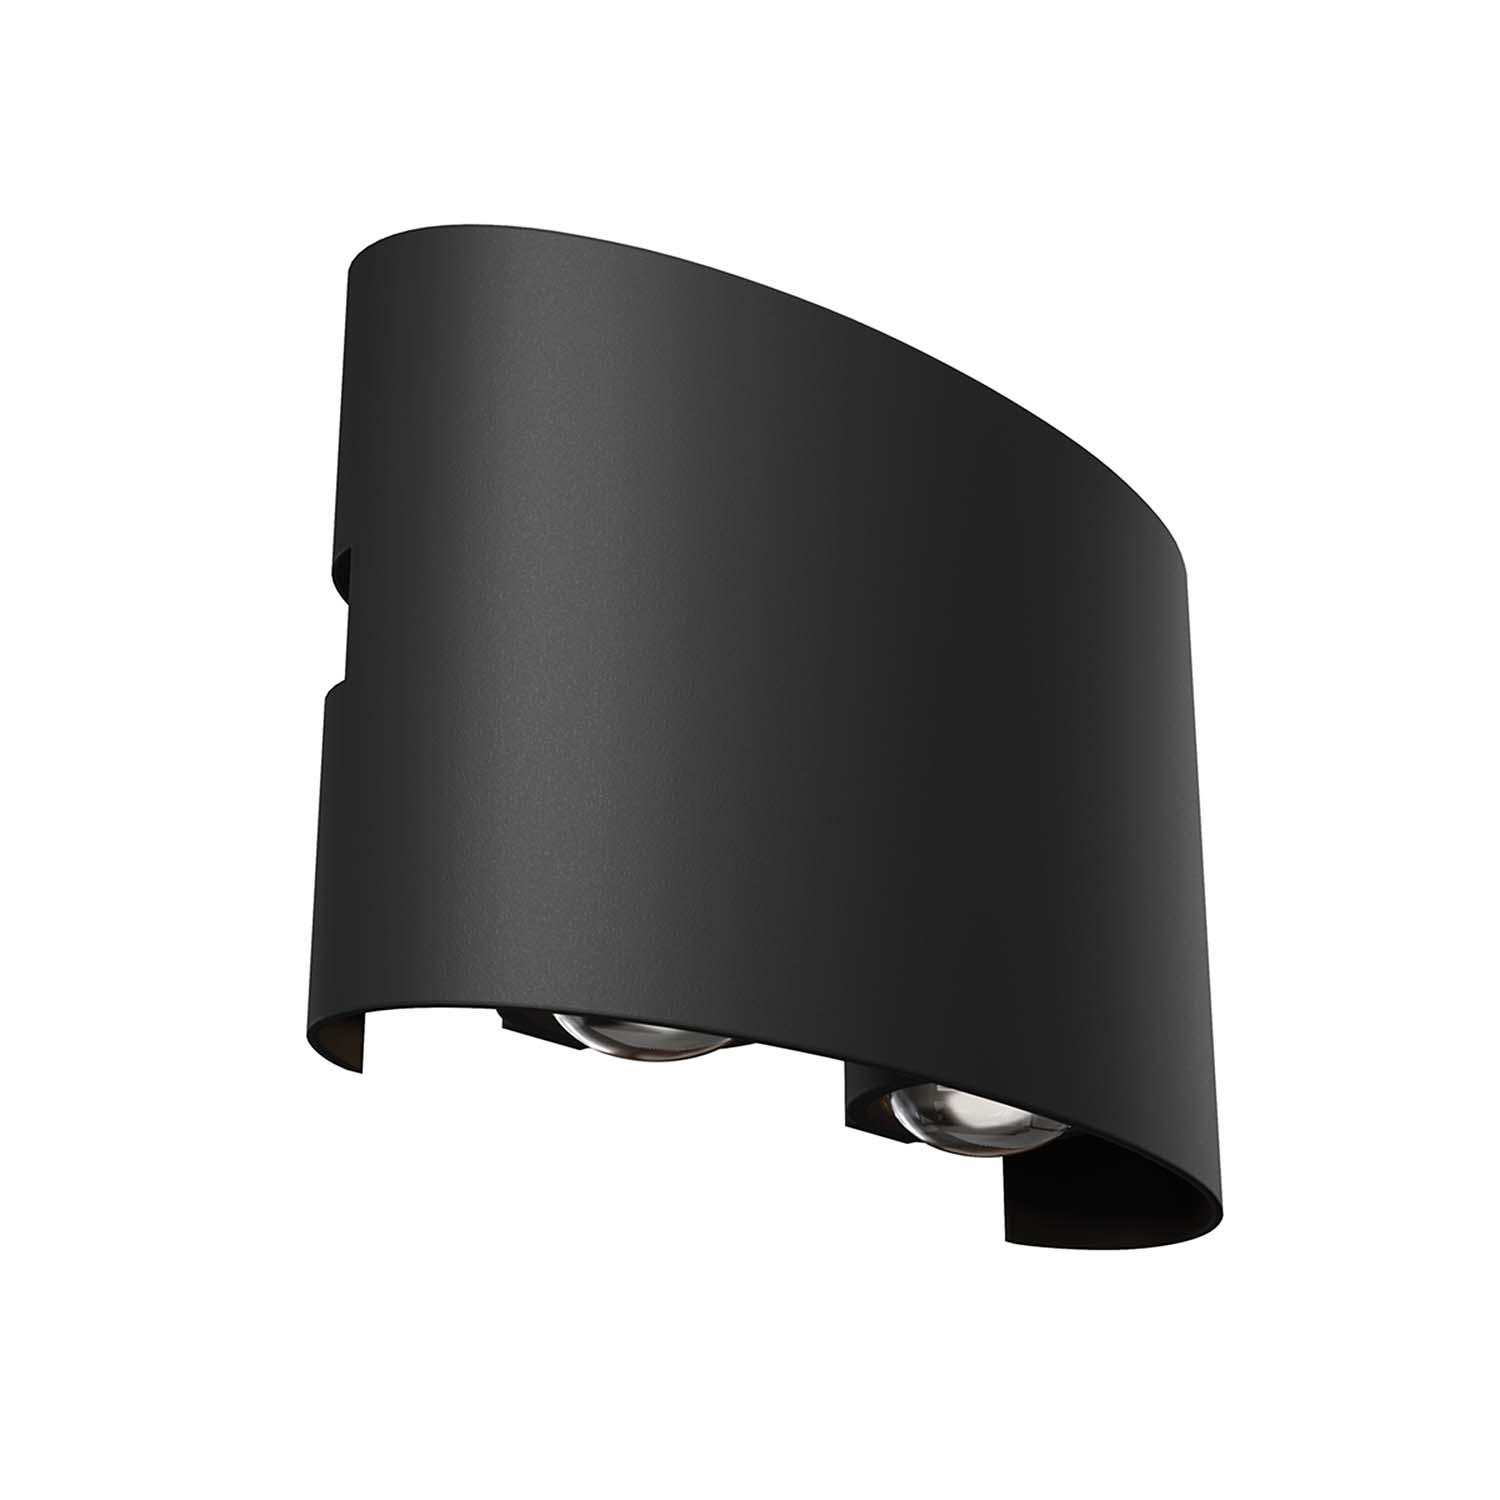 STRATO - Outdoor wall light, design and waterproof, black or white